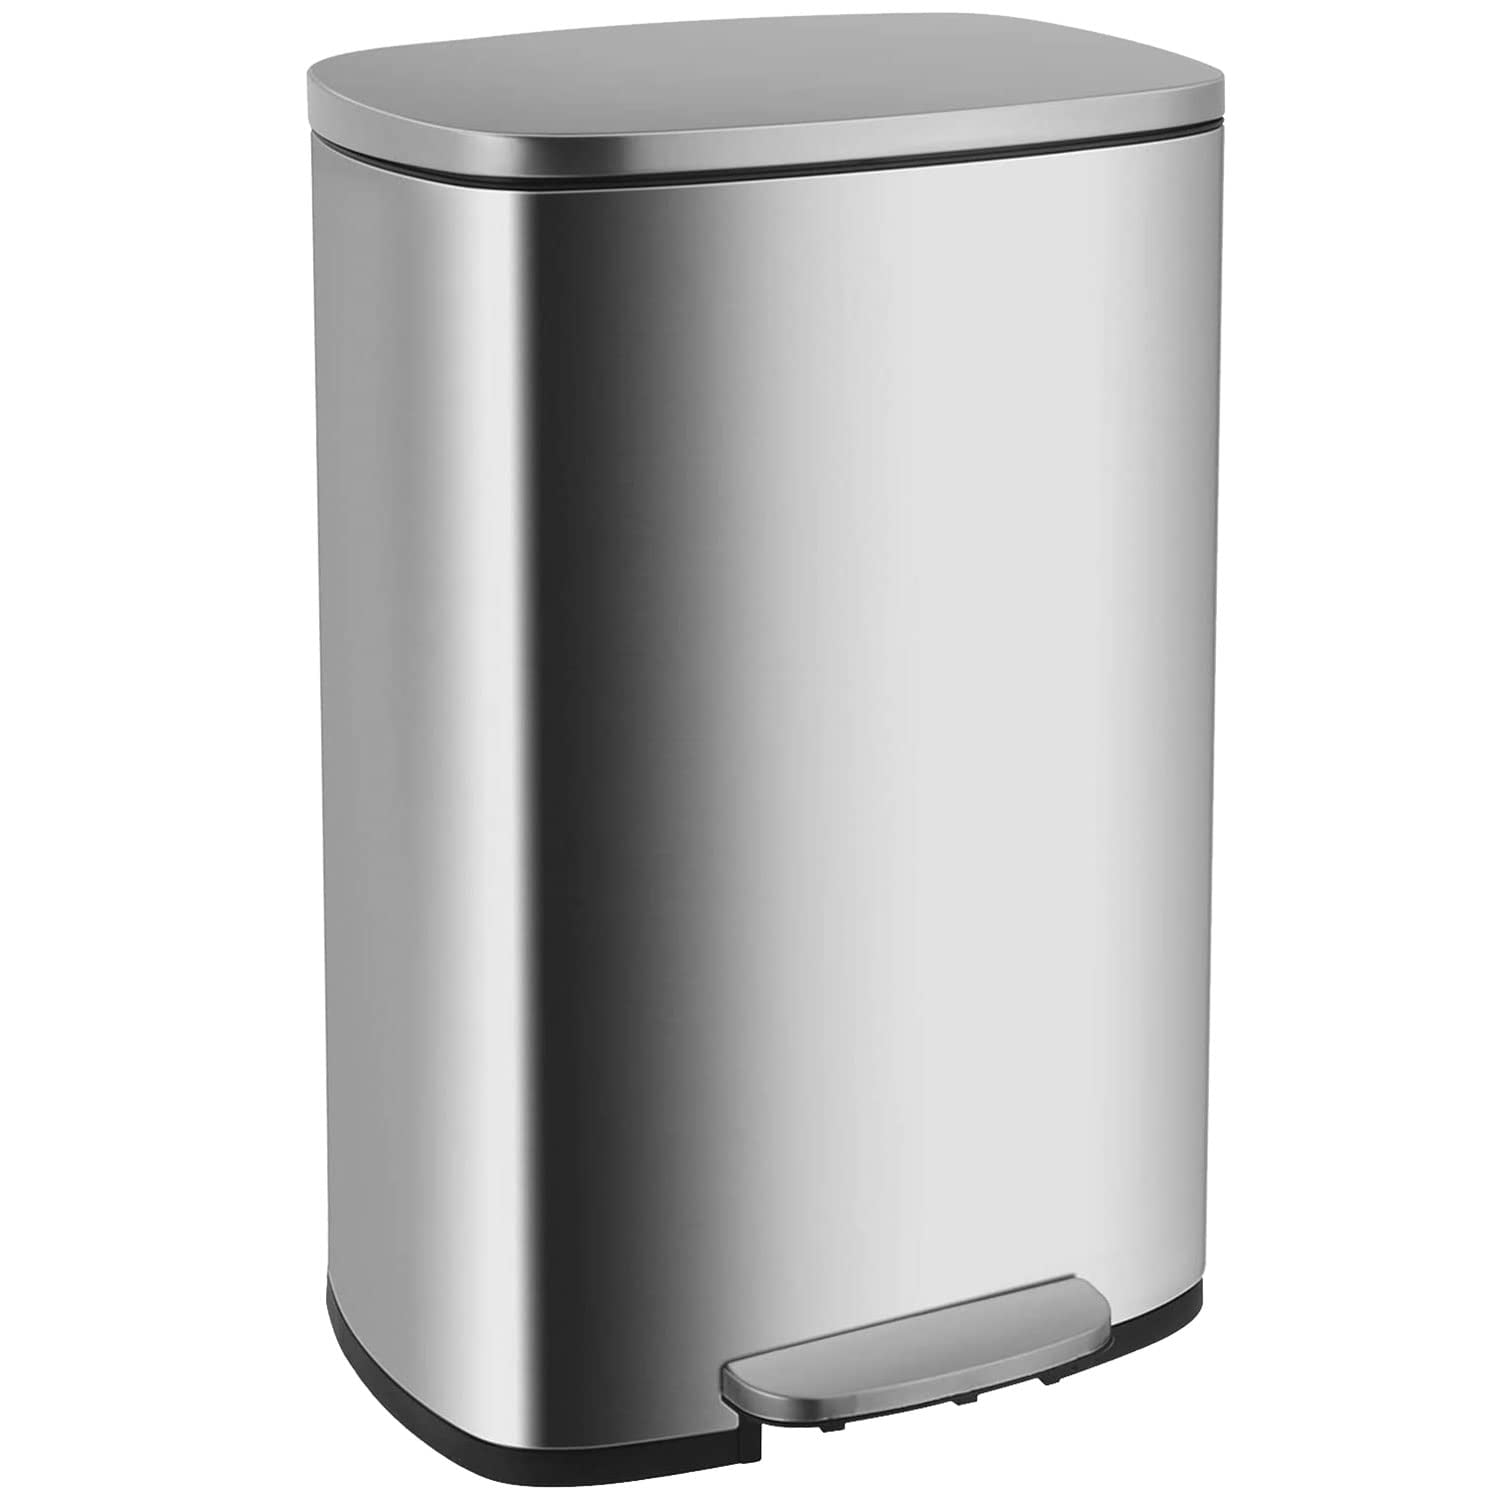 Red 50L Dkeli Kitchen Trash Can for Bathroom Bedroom Home Office Automatic Touch Free High-Capacity Garbage Can with Lid Brushed Stainless Steel Waste Bin 13 Gallon